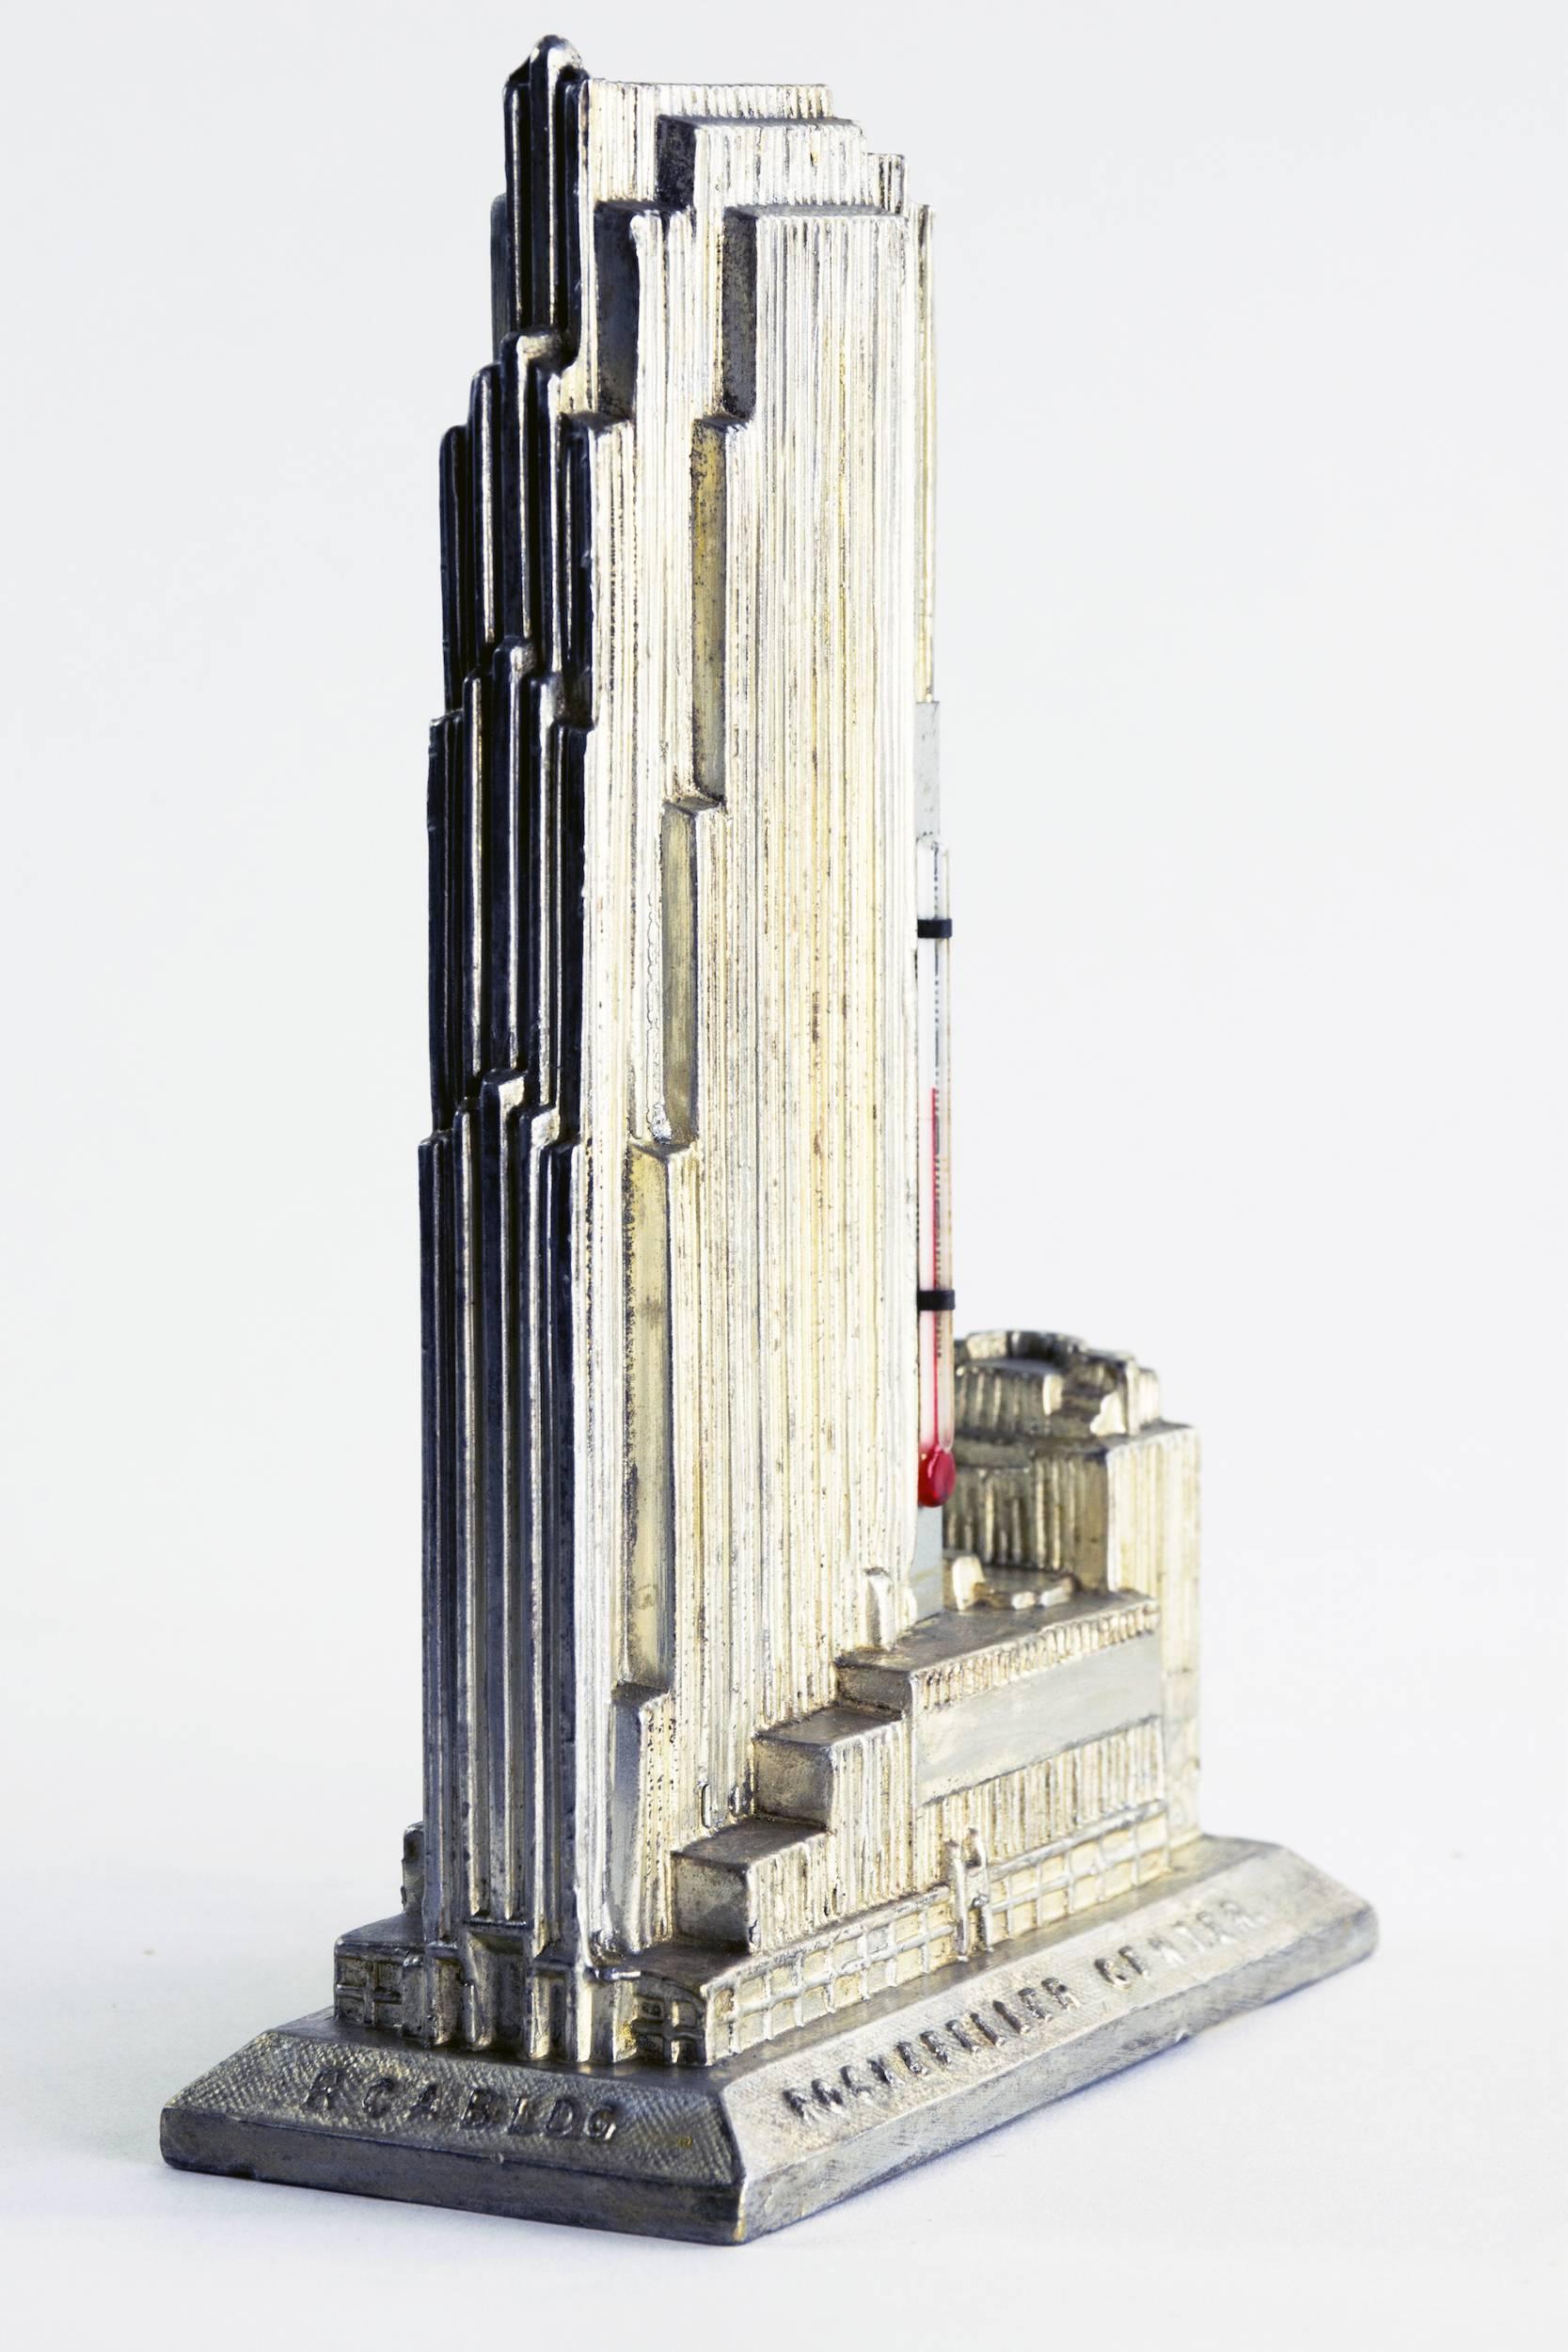 This, the largest and best-detailed of the 1930s replicas of New York's RCA Building (now called the Comcast Building), is of silver plated cast lead. Produced by Staybright Novelty, a New York company (presumably) of whom little is known, beyond